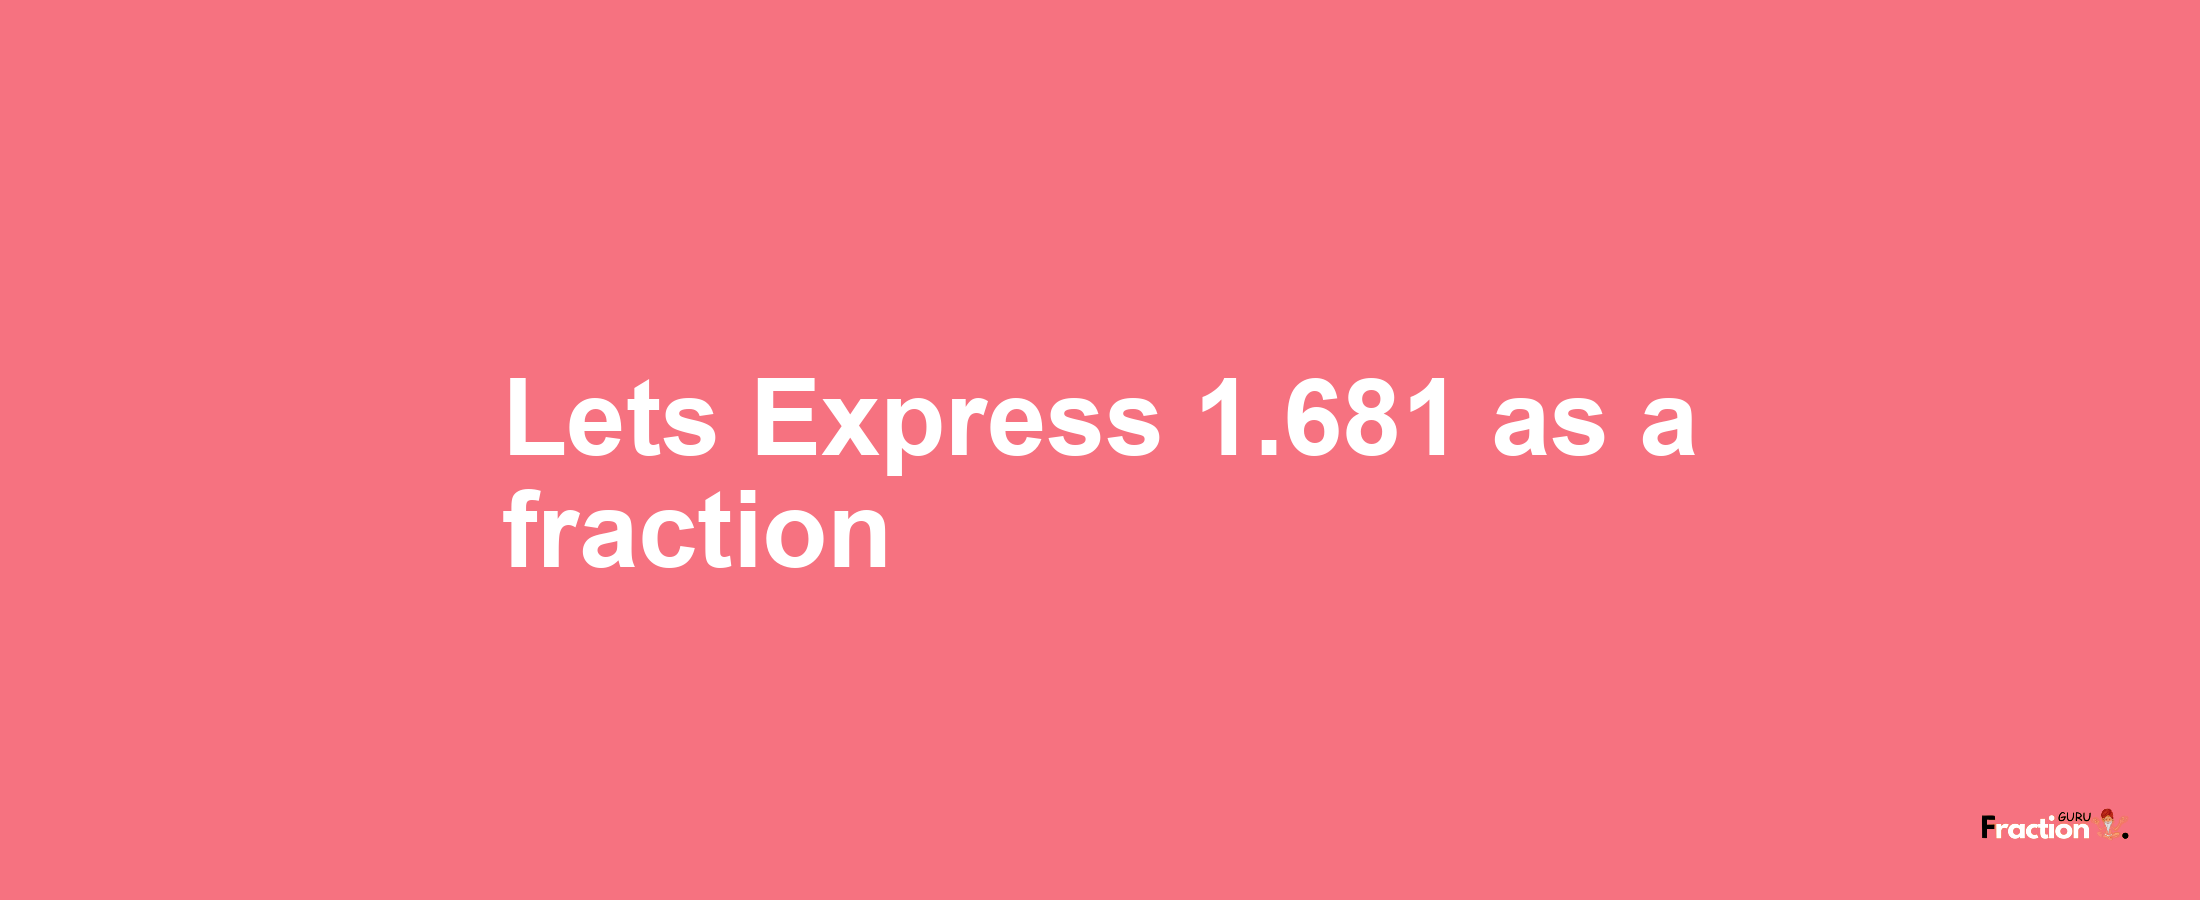 Lets Express 1.681 as afraction